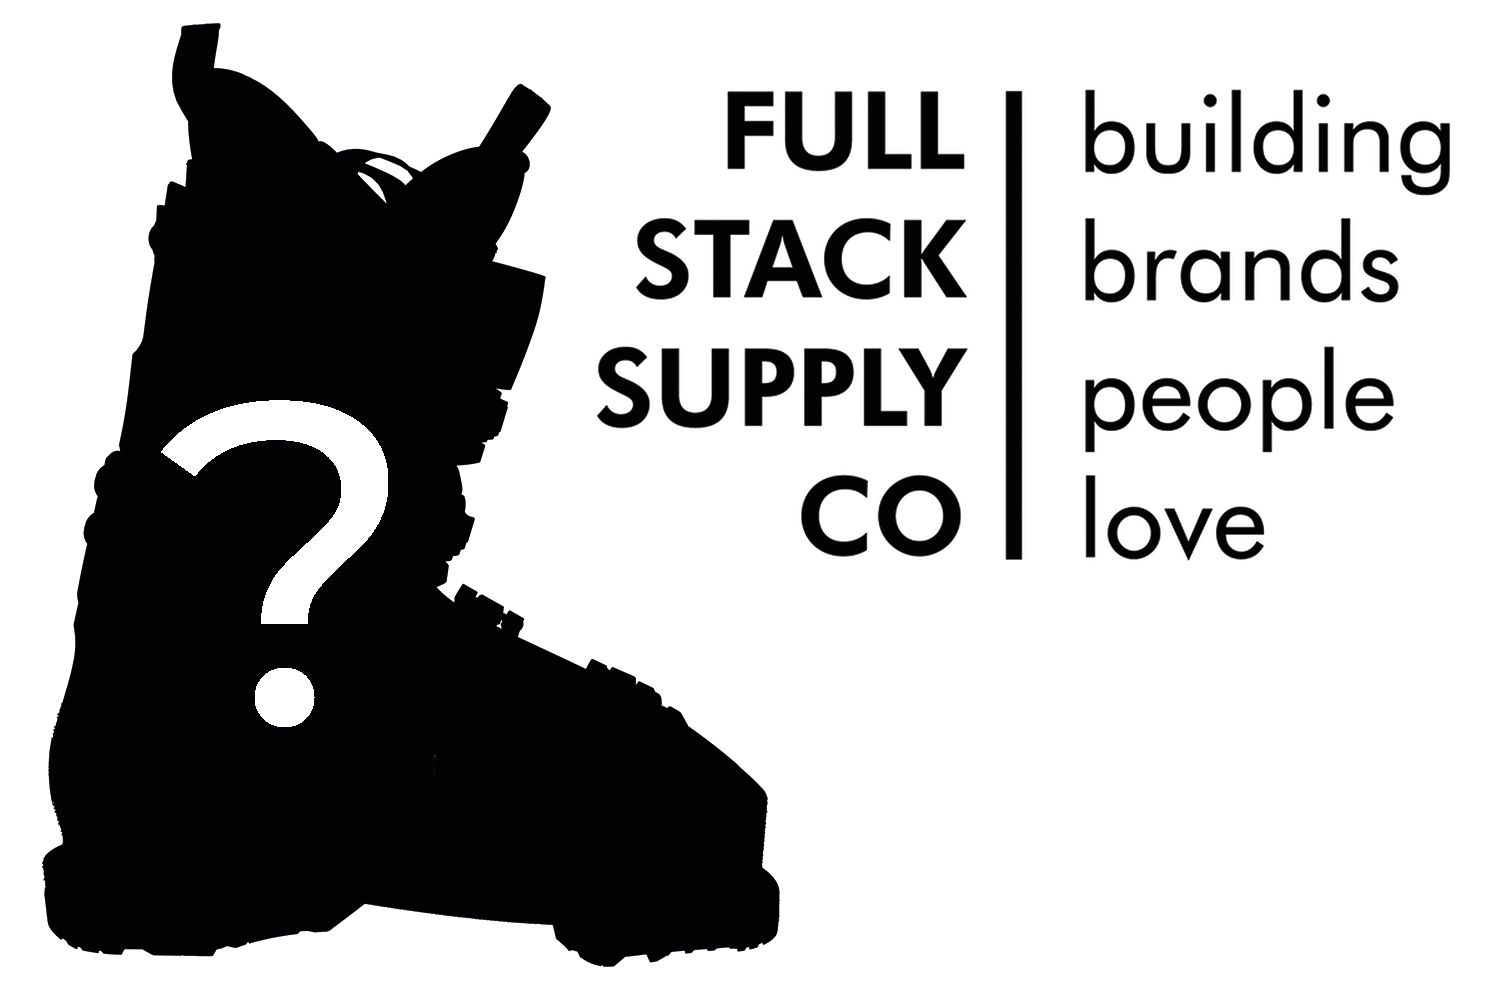 Full Stack Supply Co (parent company of Faction Skis & FW Apparel) announces they are launching a new ski boot brand